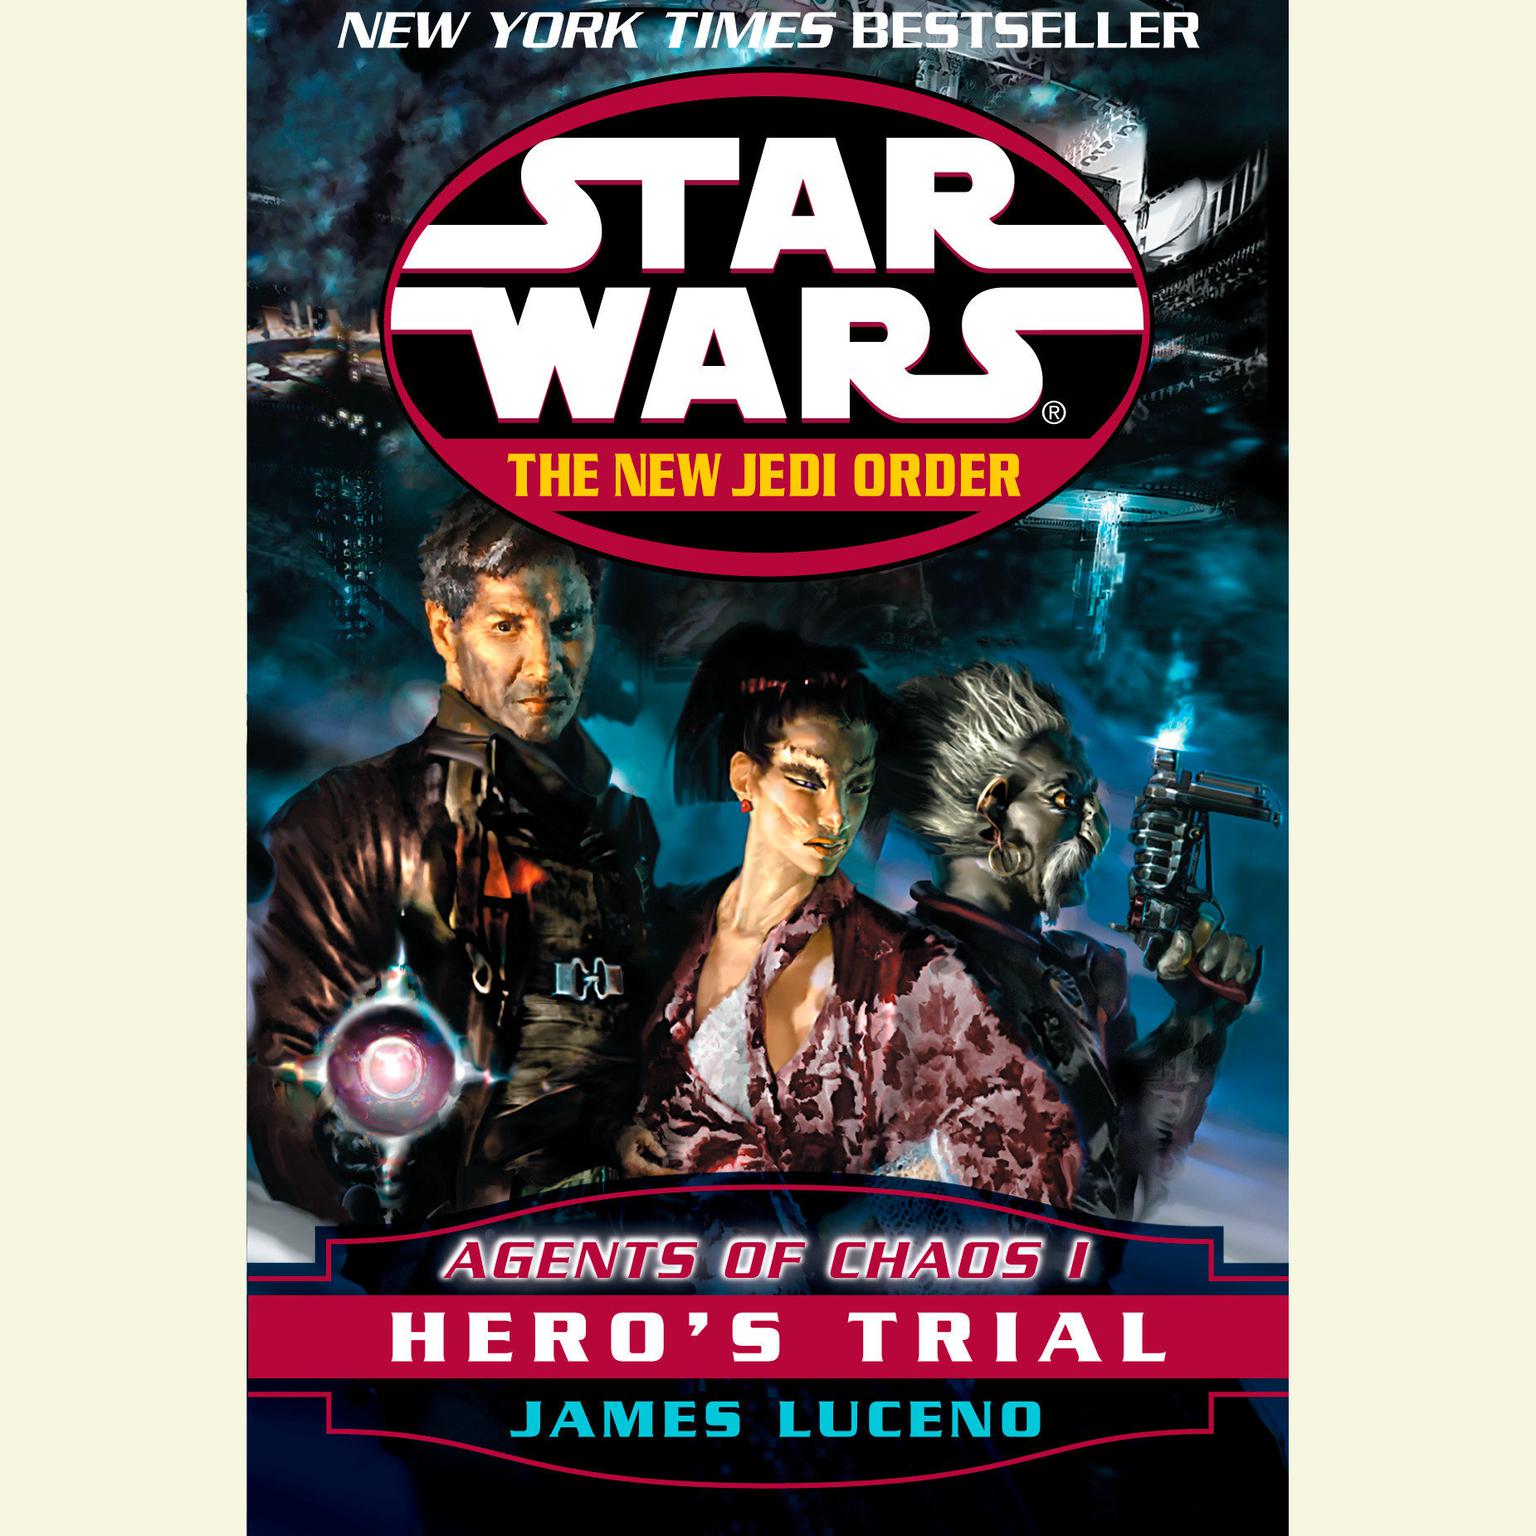 Star Wars: The New Jedi Order: Agents of Chaos I: Heros Trial (Abridged) Audiobook, by James Luceno